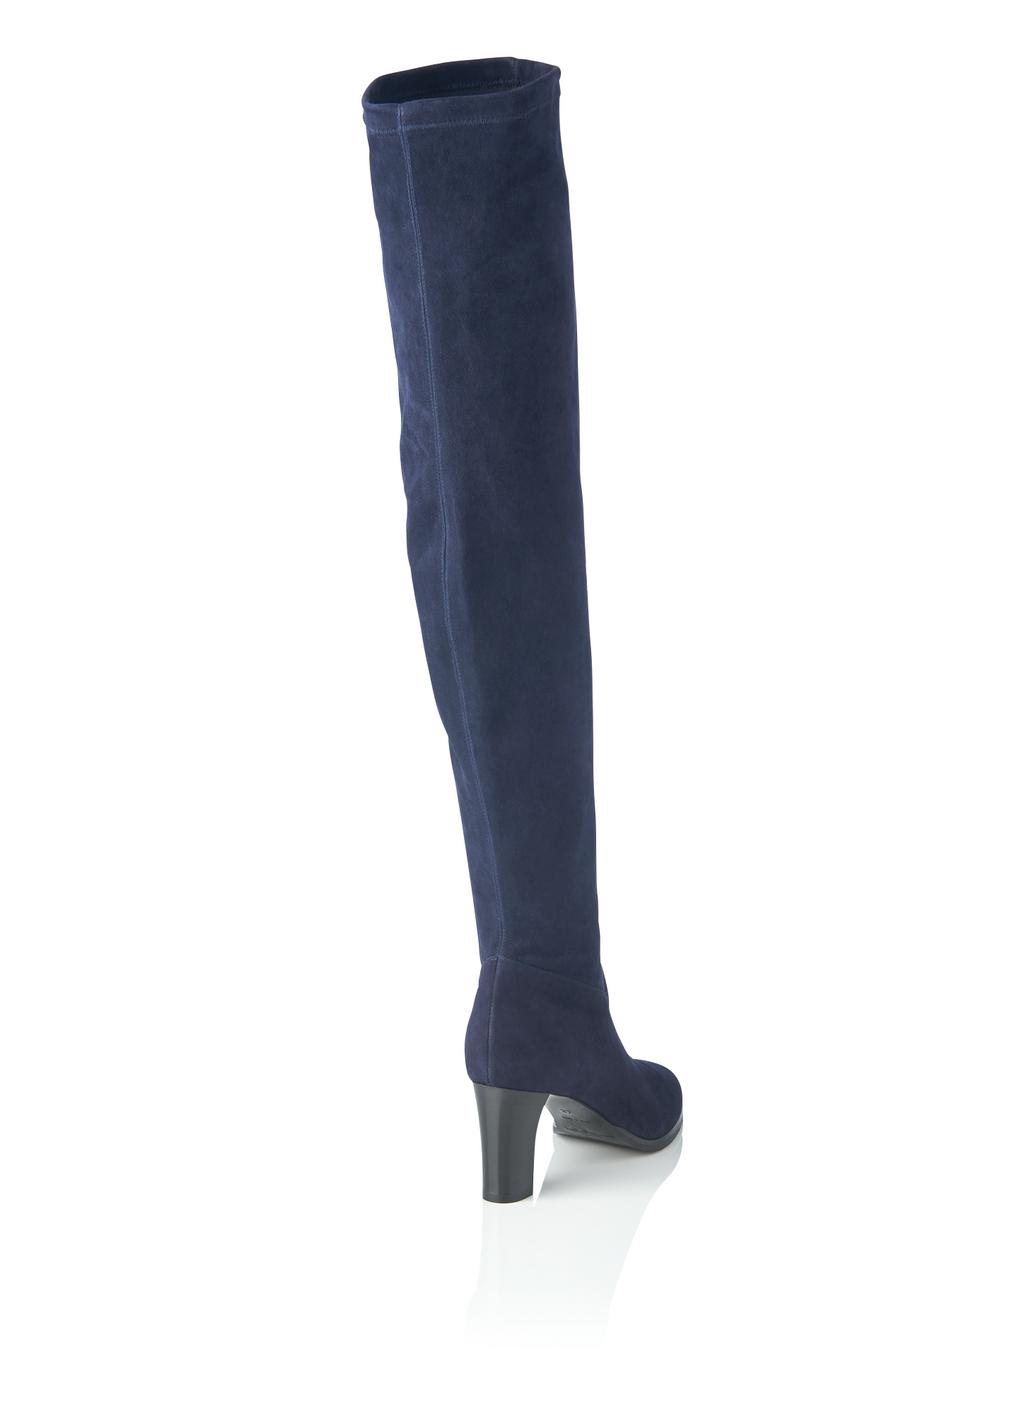 Womens Shoes Boots Over-the-knee boots LK Bennett Kaori Navy in Blue 